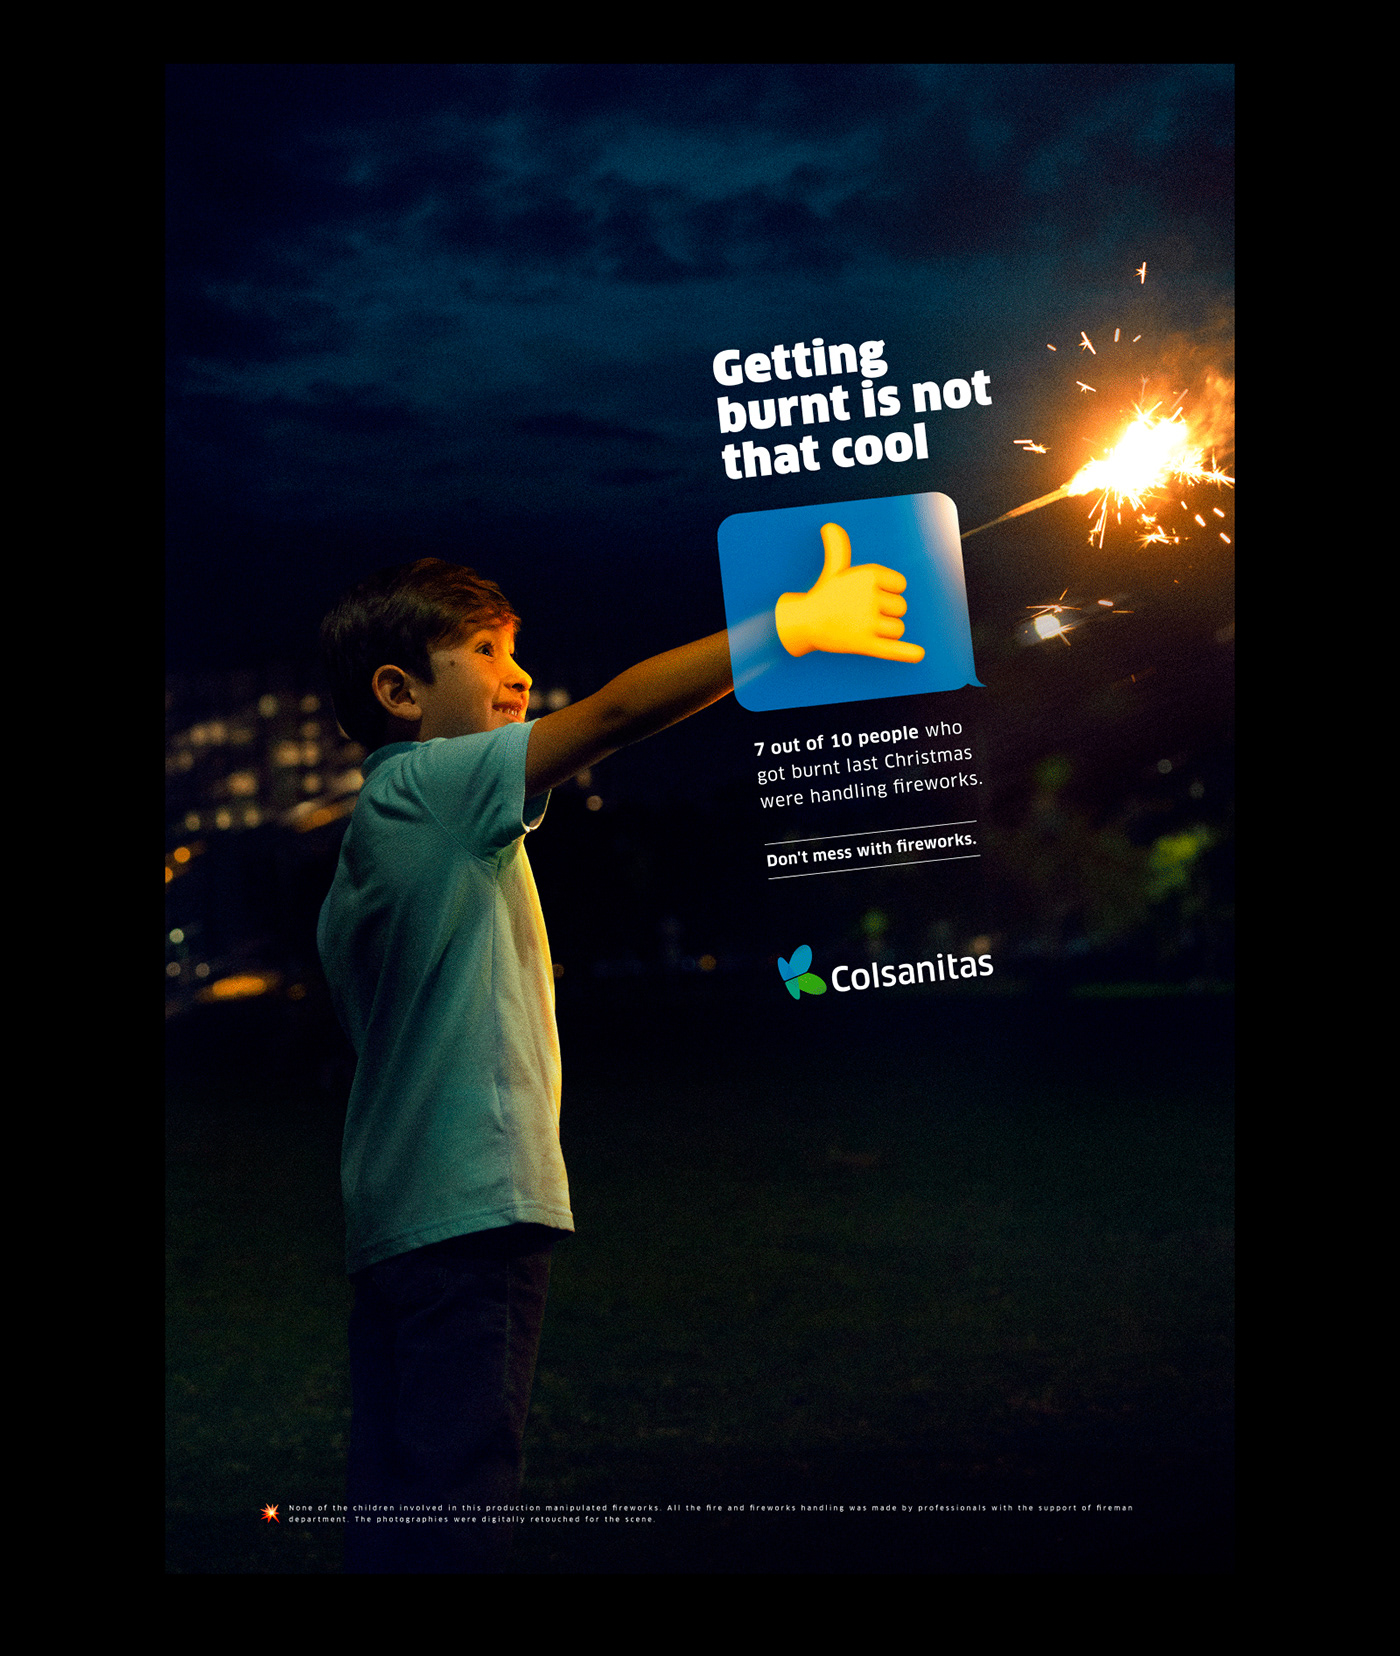 This campaign wants to show the children and adults that manipulate fireworks in Christmas is not th